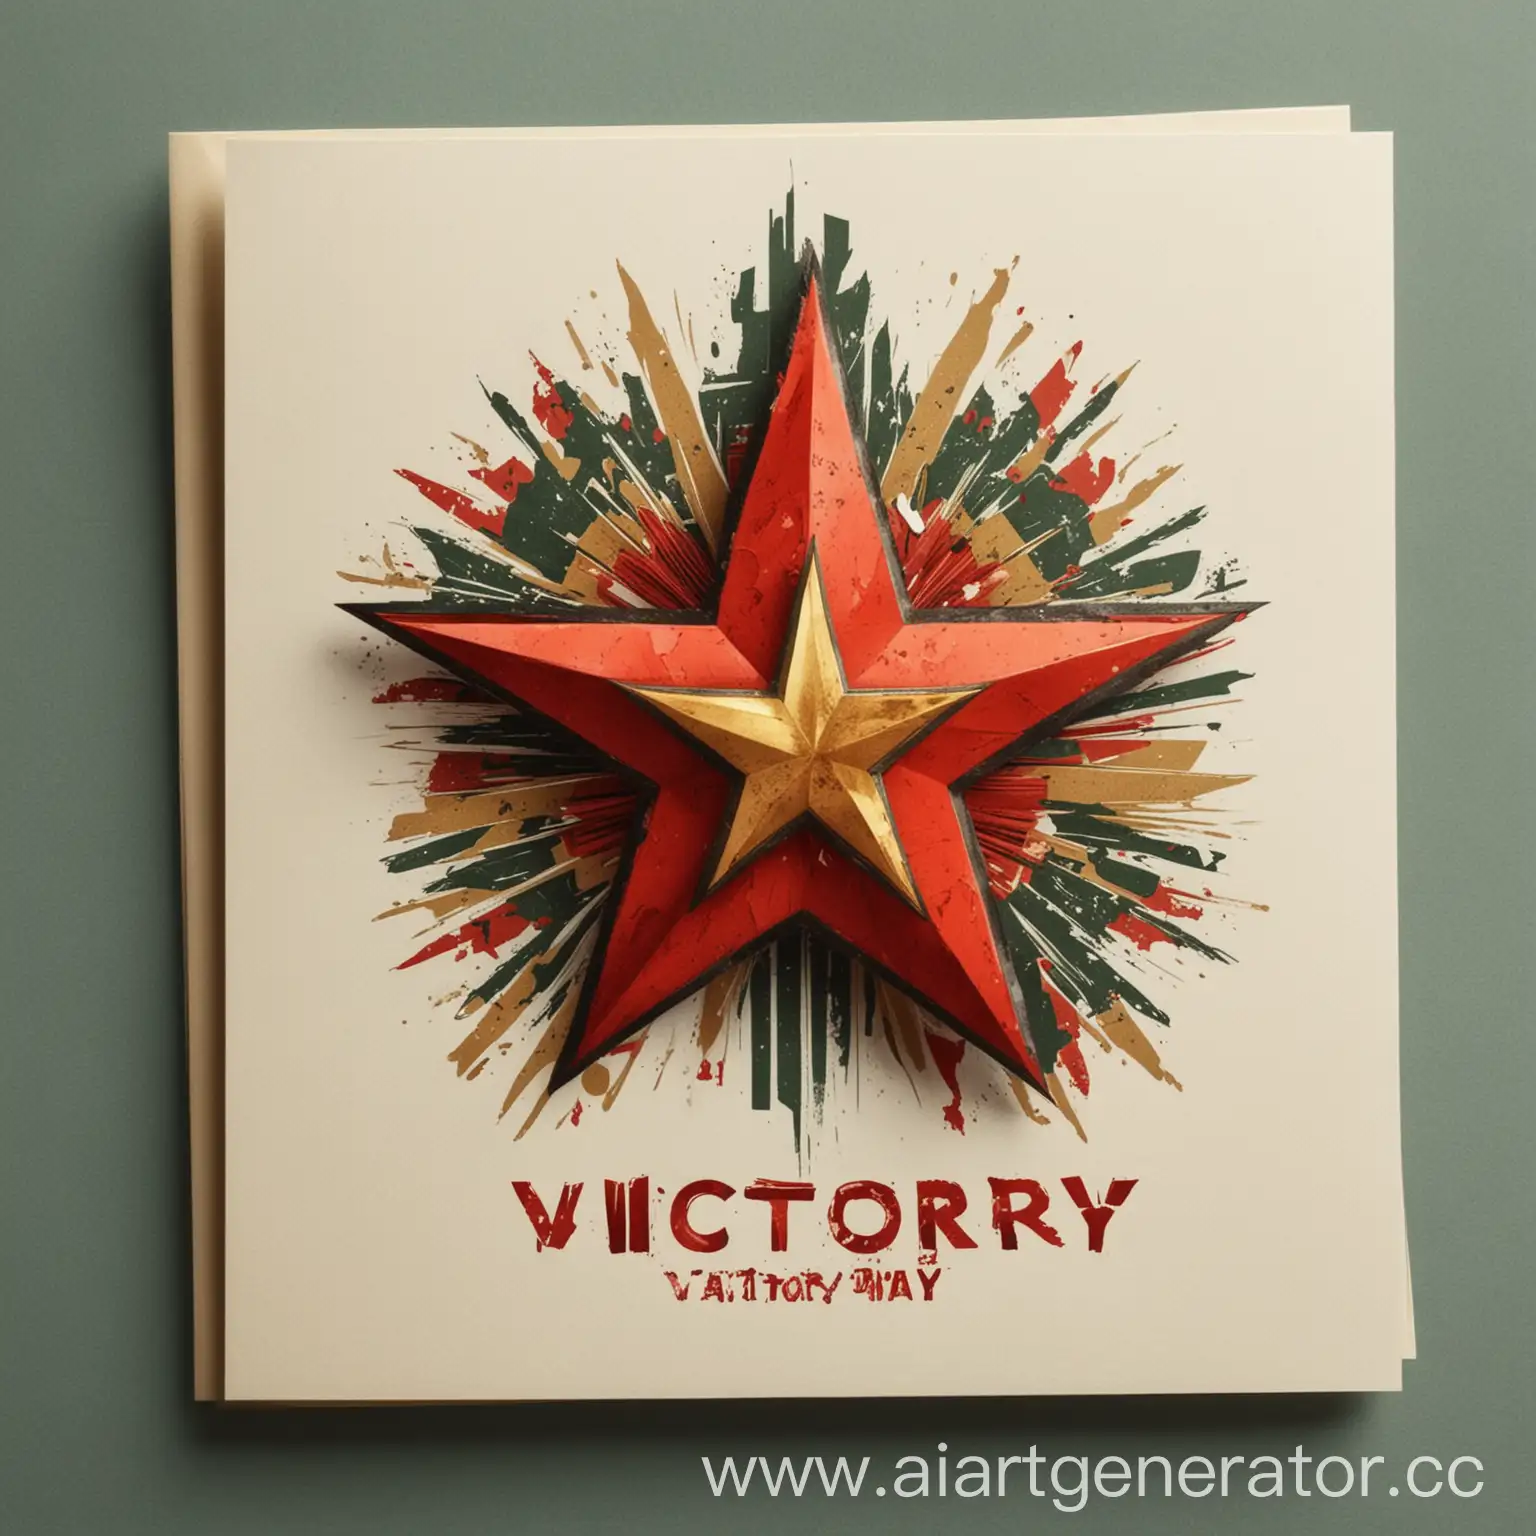 Victory-Day-Celebration-with-Patriotic-Flags-and-Fireworks